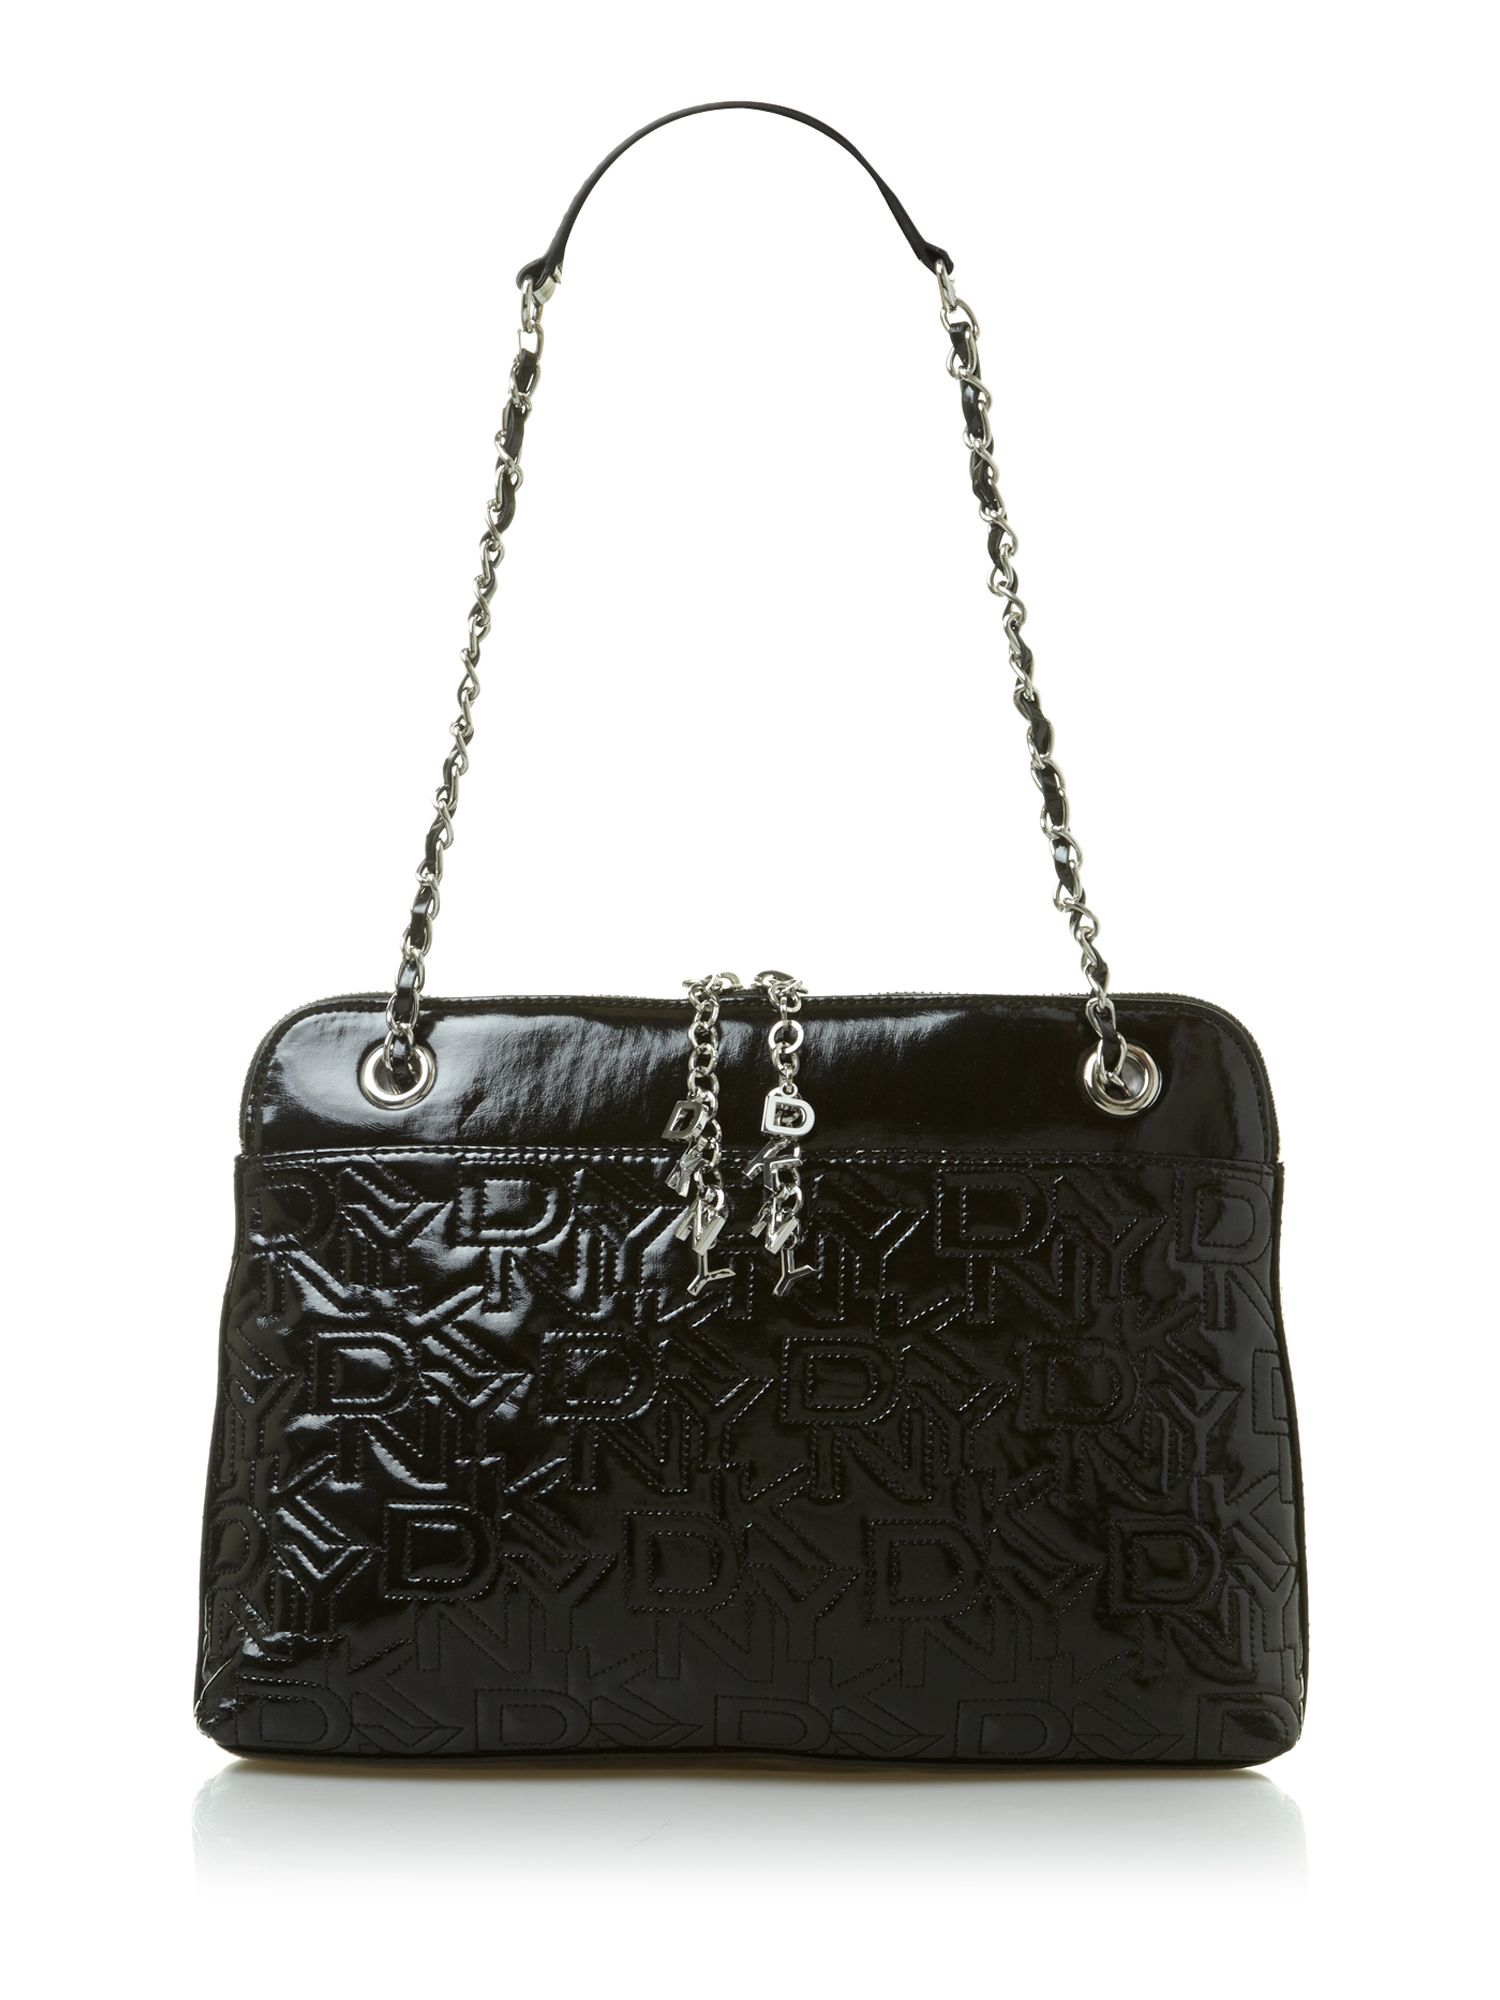 Dkny Metallic Quilted Logo Small Black Cross Body Bag in Black | Lyst